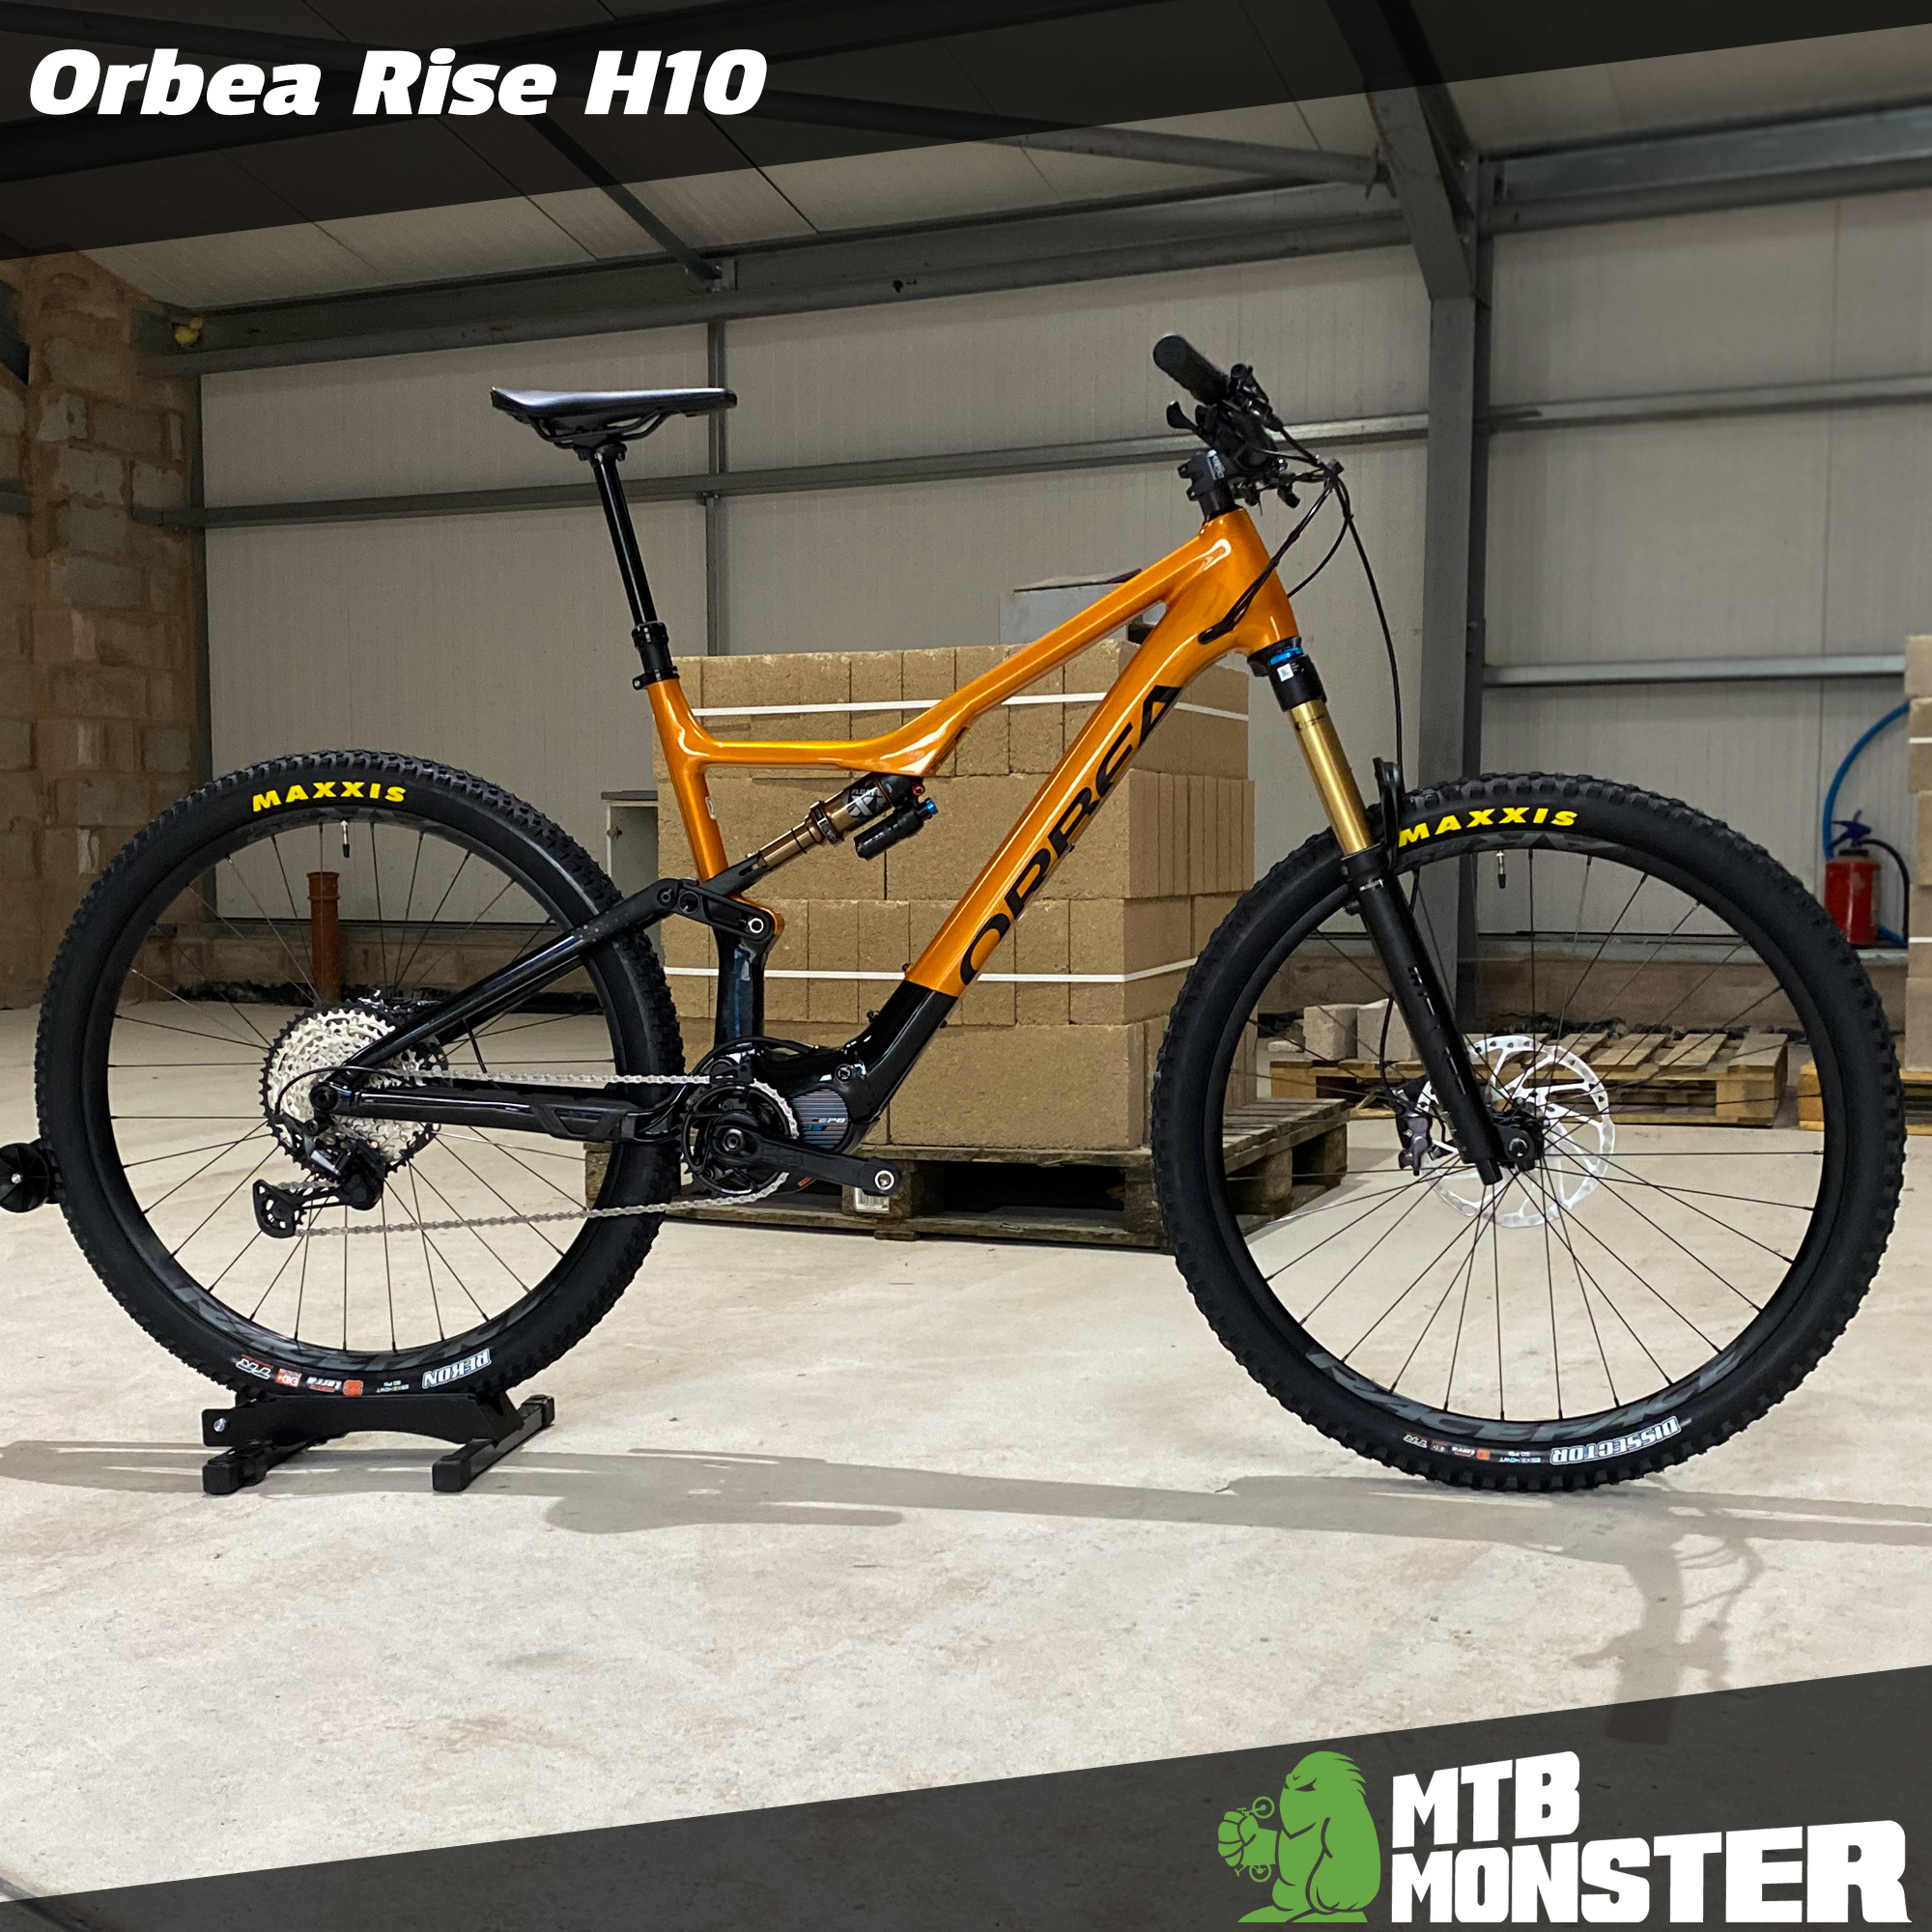 The Orbea Rise H10... finished in stunning gloss orange/black!